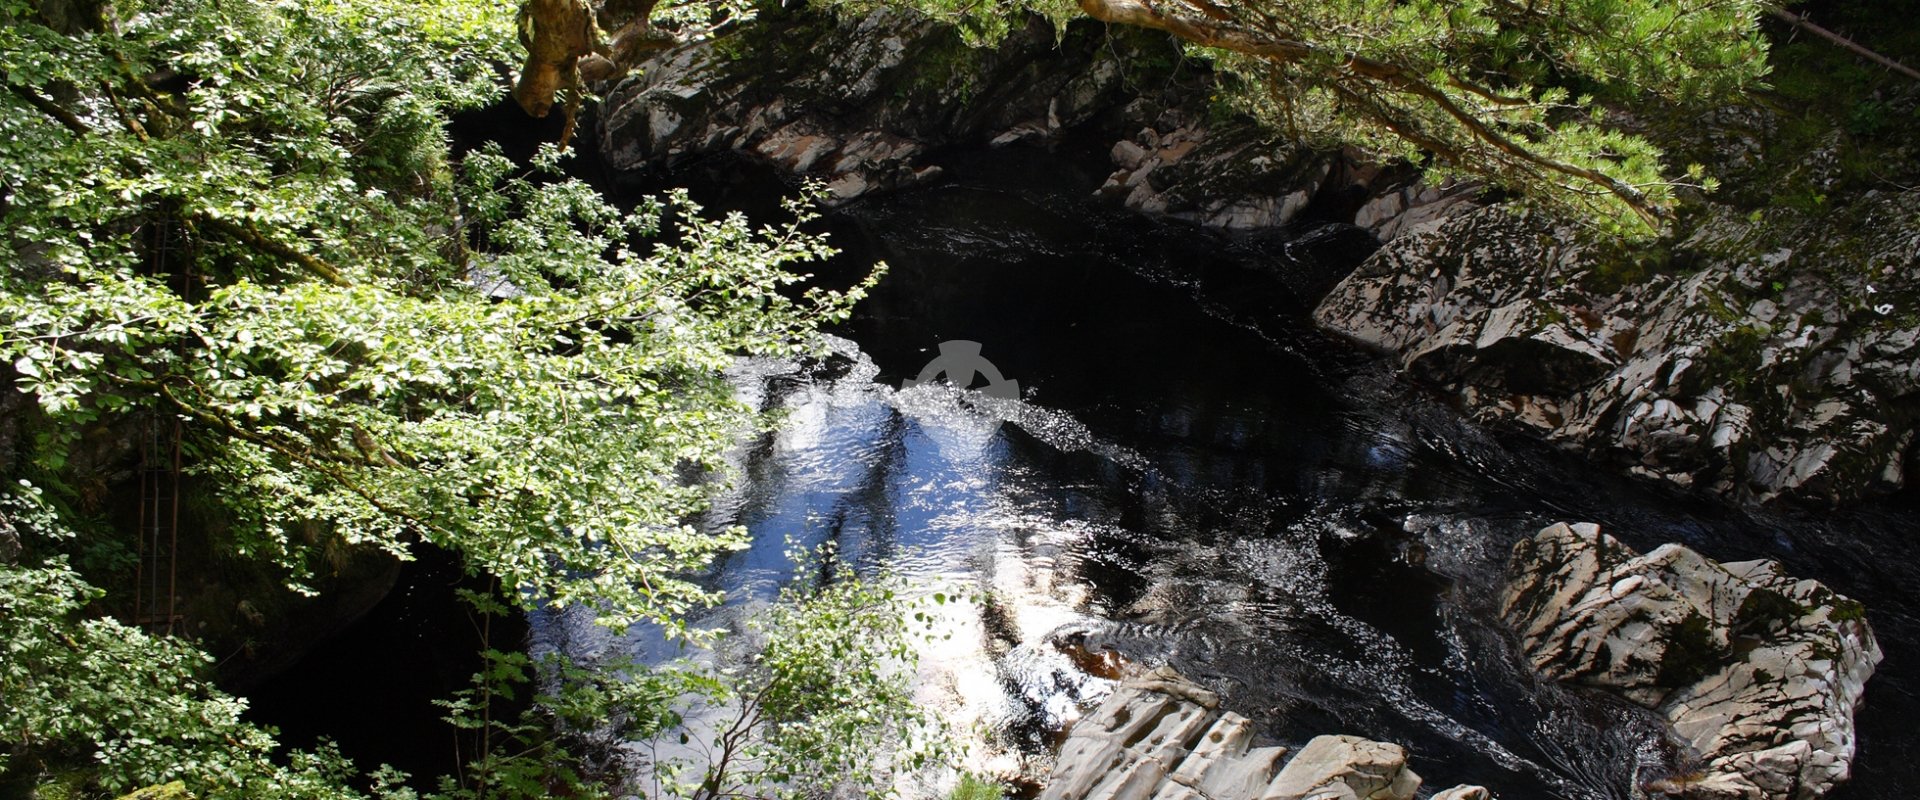 findhorn gorge panoramic